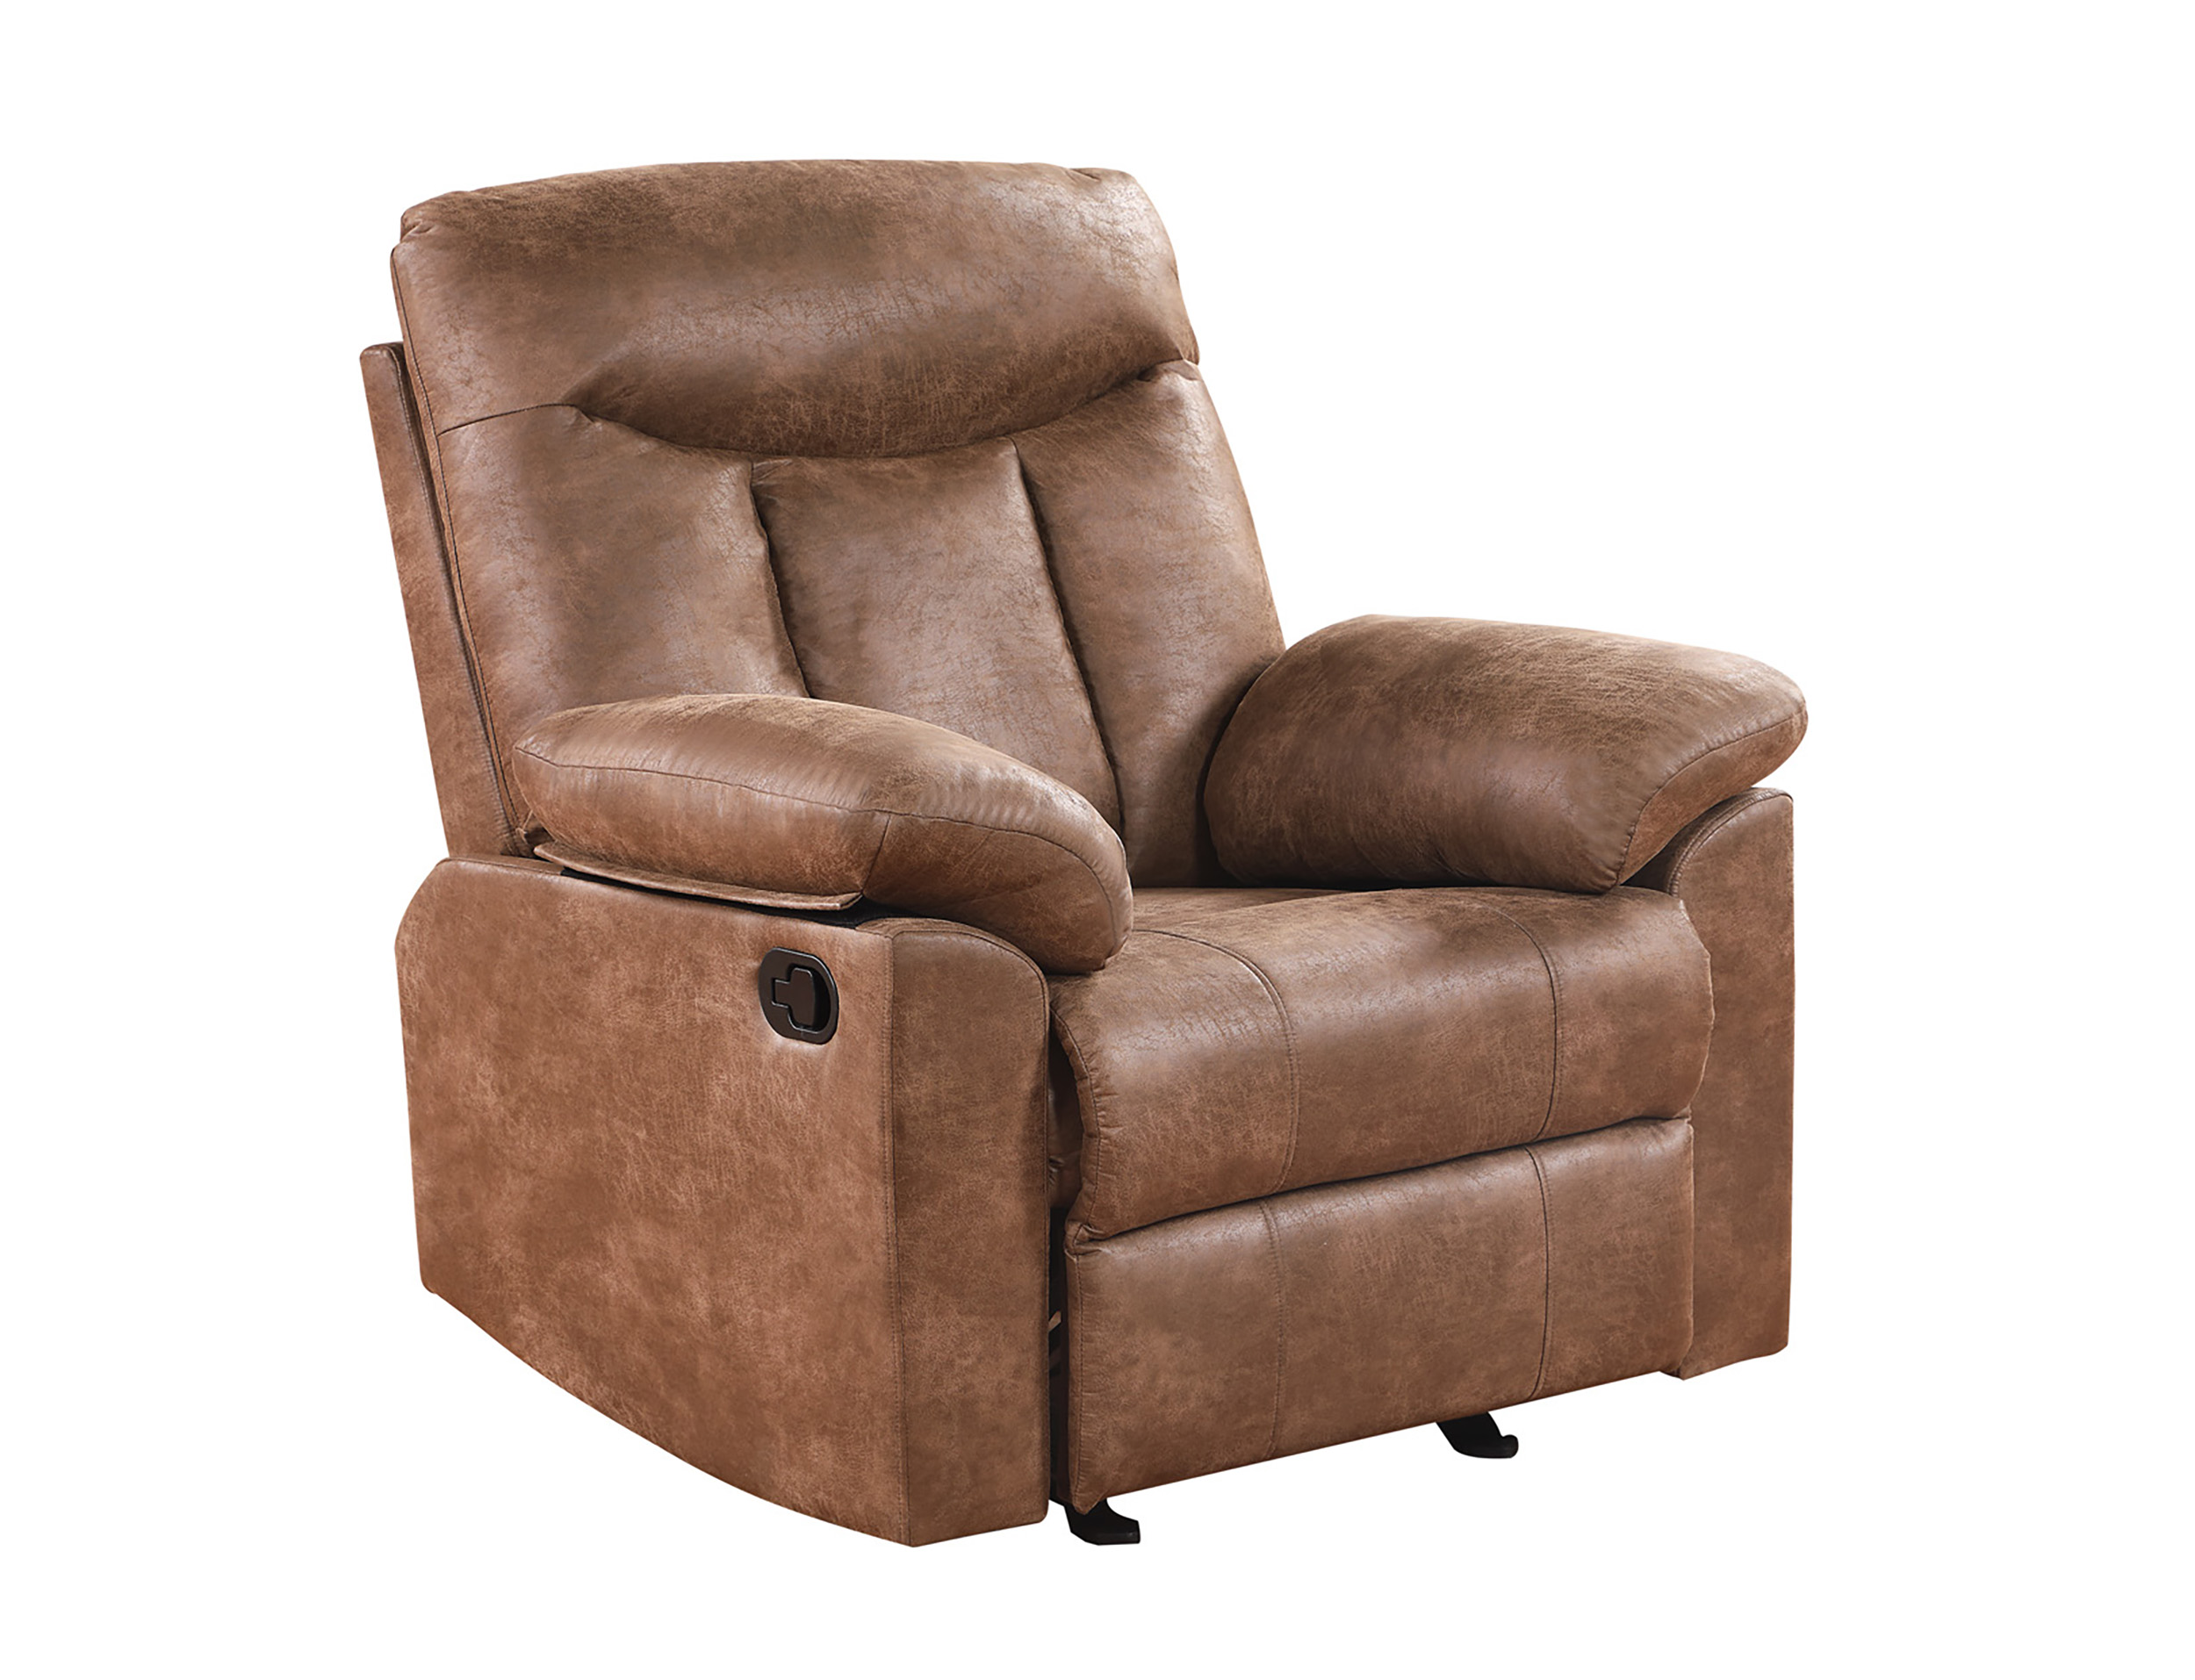 Becket Big and Tall Memory Foam Rocker Recliner W/USB Vintage Brown, Supports up to 500 lbs - image 3 of 10